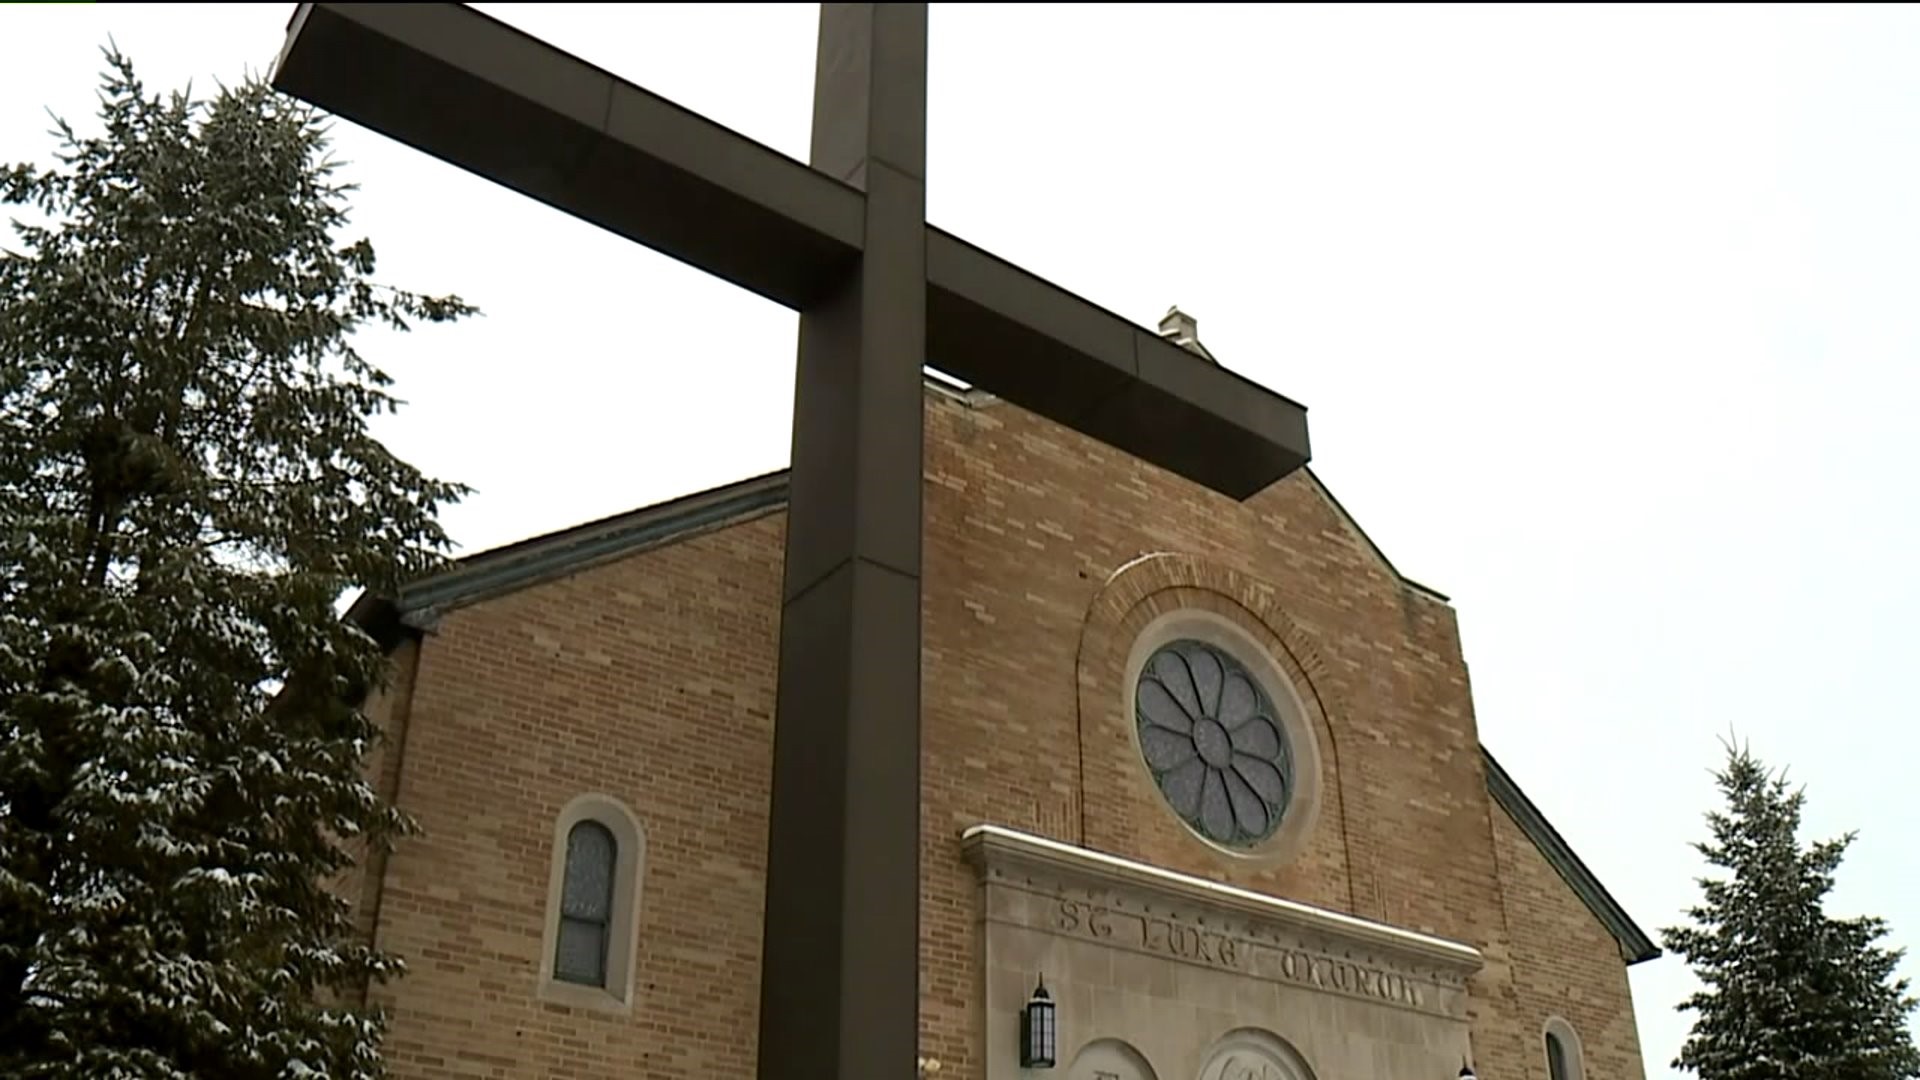 Former Church Employee Sentenced for Theft from Parish